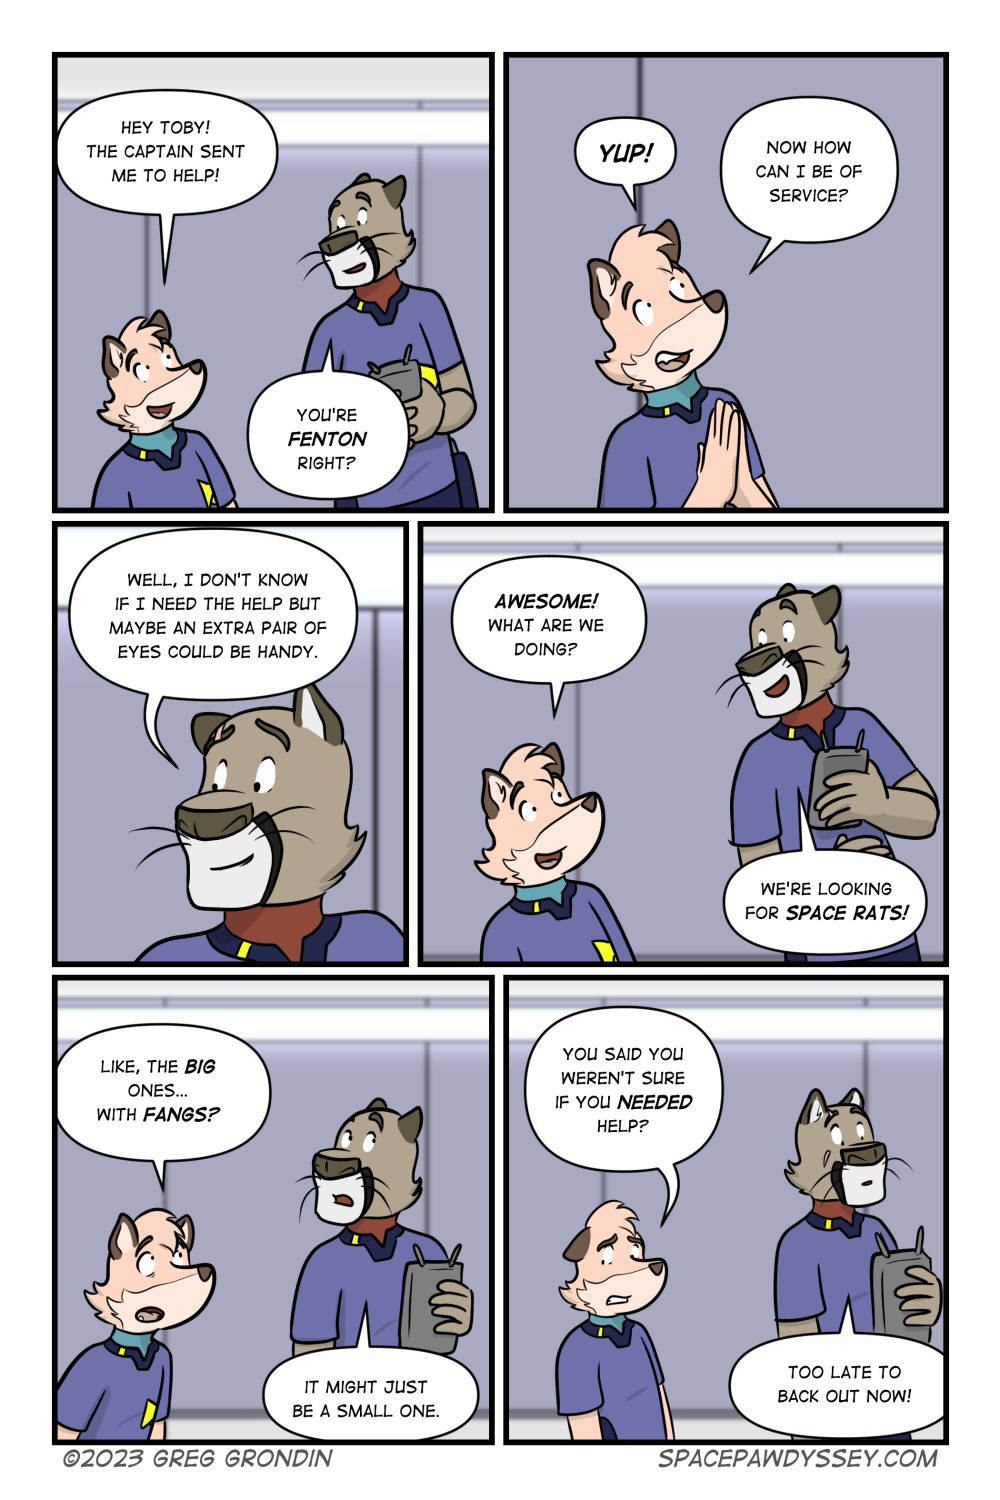 Space Pawdyssey #612